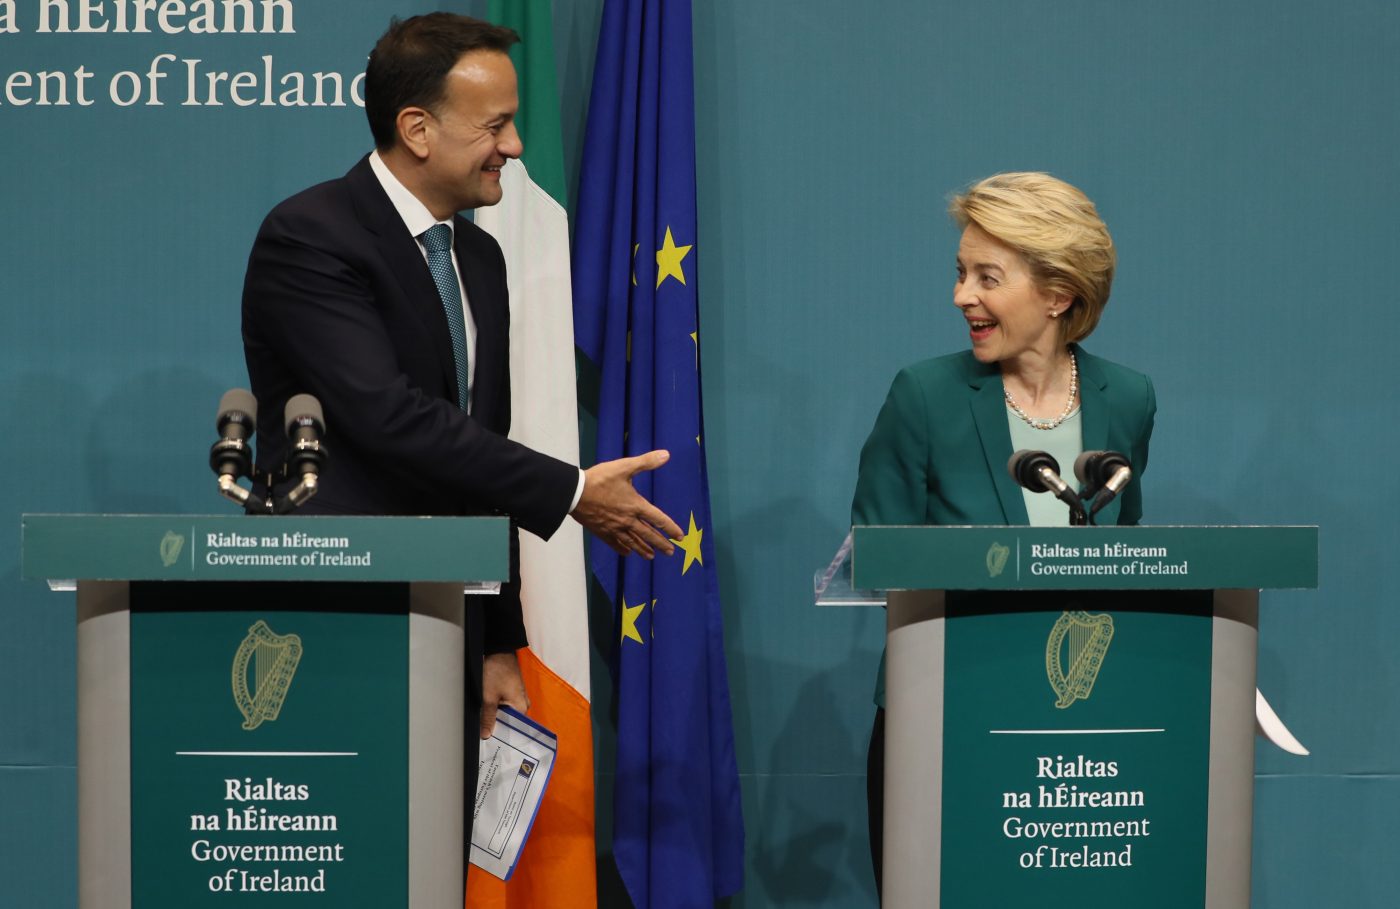 Photo: Taoiseach Leo Varadkar and European Commission President Ursula von der Leyen hold a joint press conference at Government Buildings, Dublin. Credit: Brian Lawless/PA Images